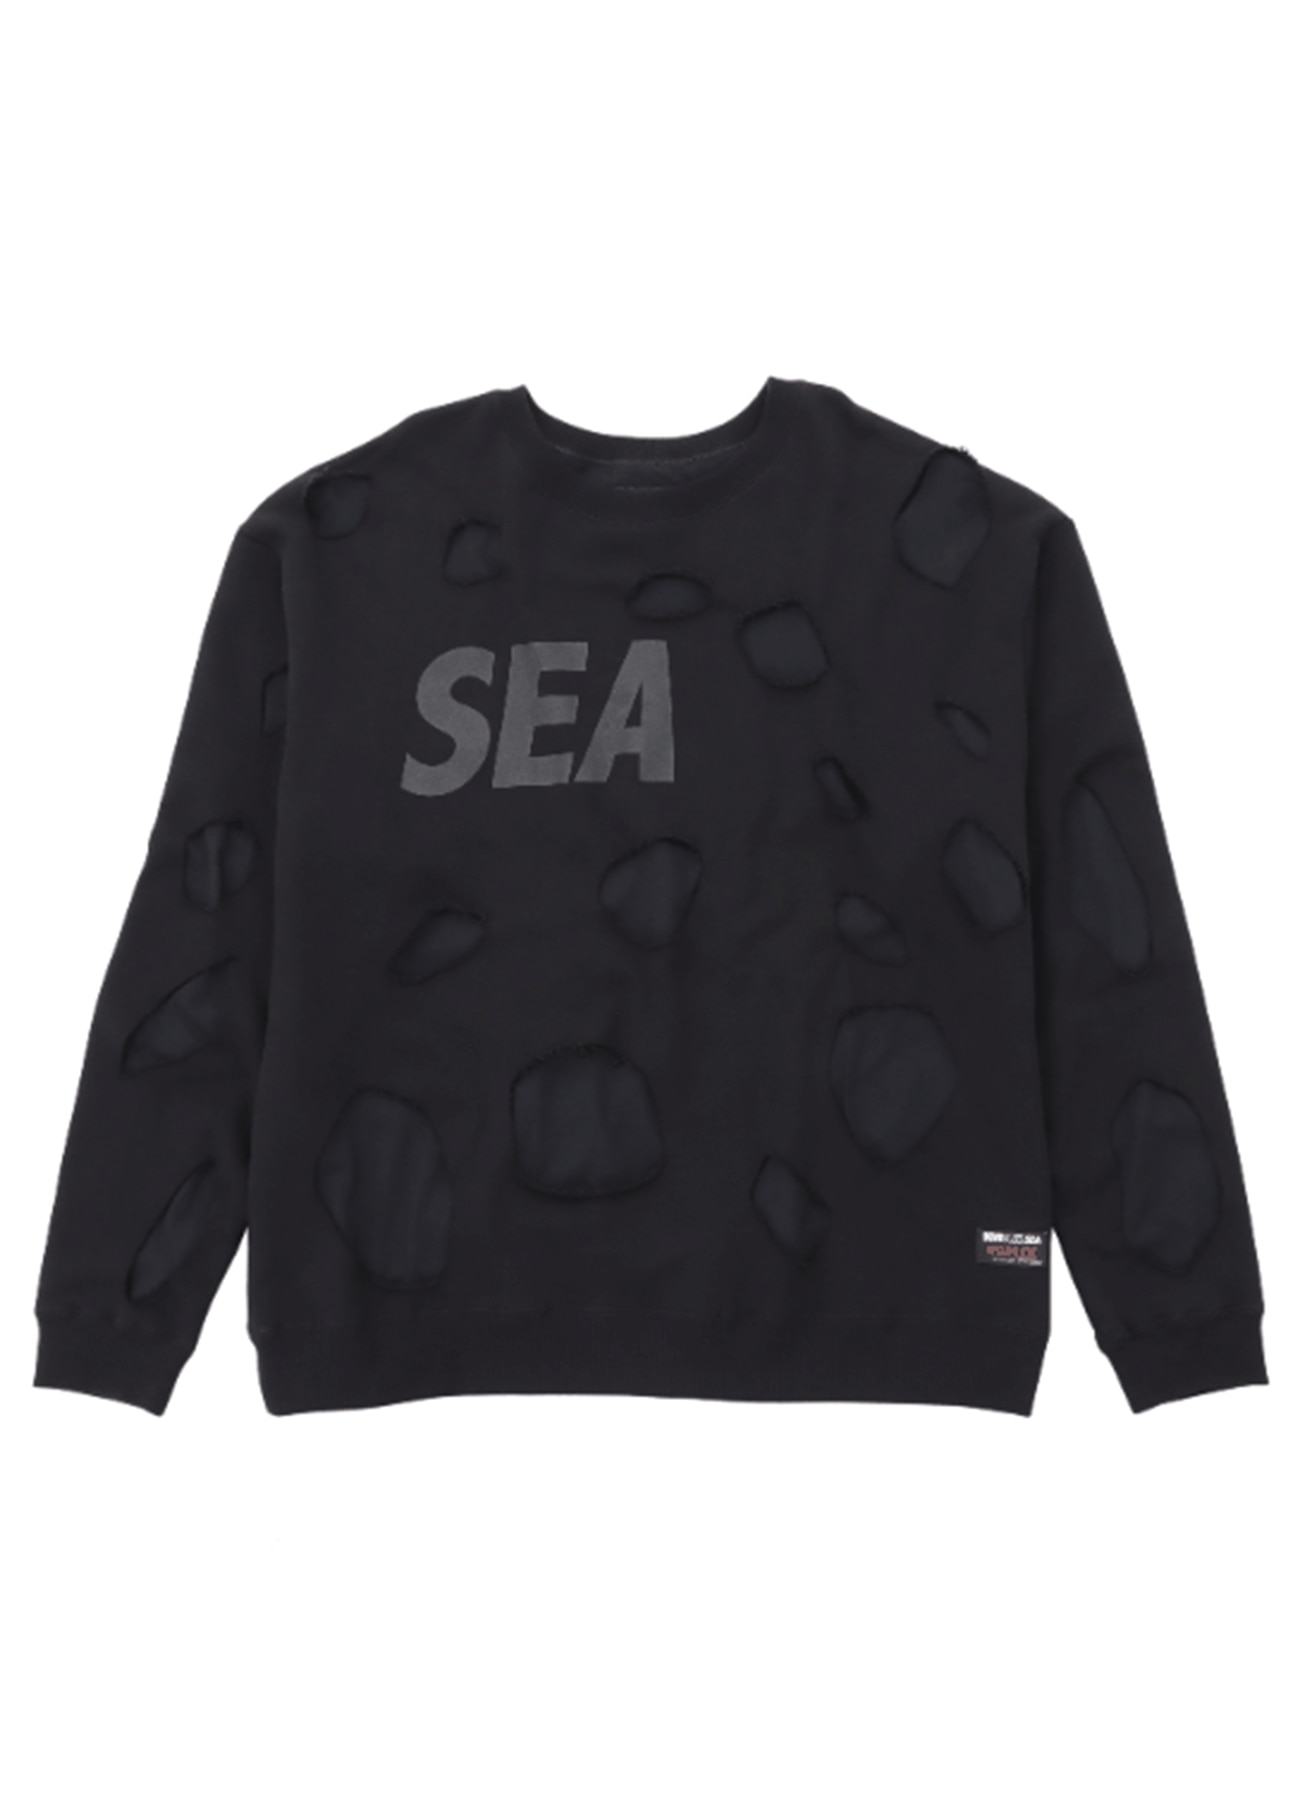 WILDSIDE × WIND AND SEA Collection ｜WILDSIDE YOHJI YAMAMOTO [Official